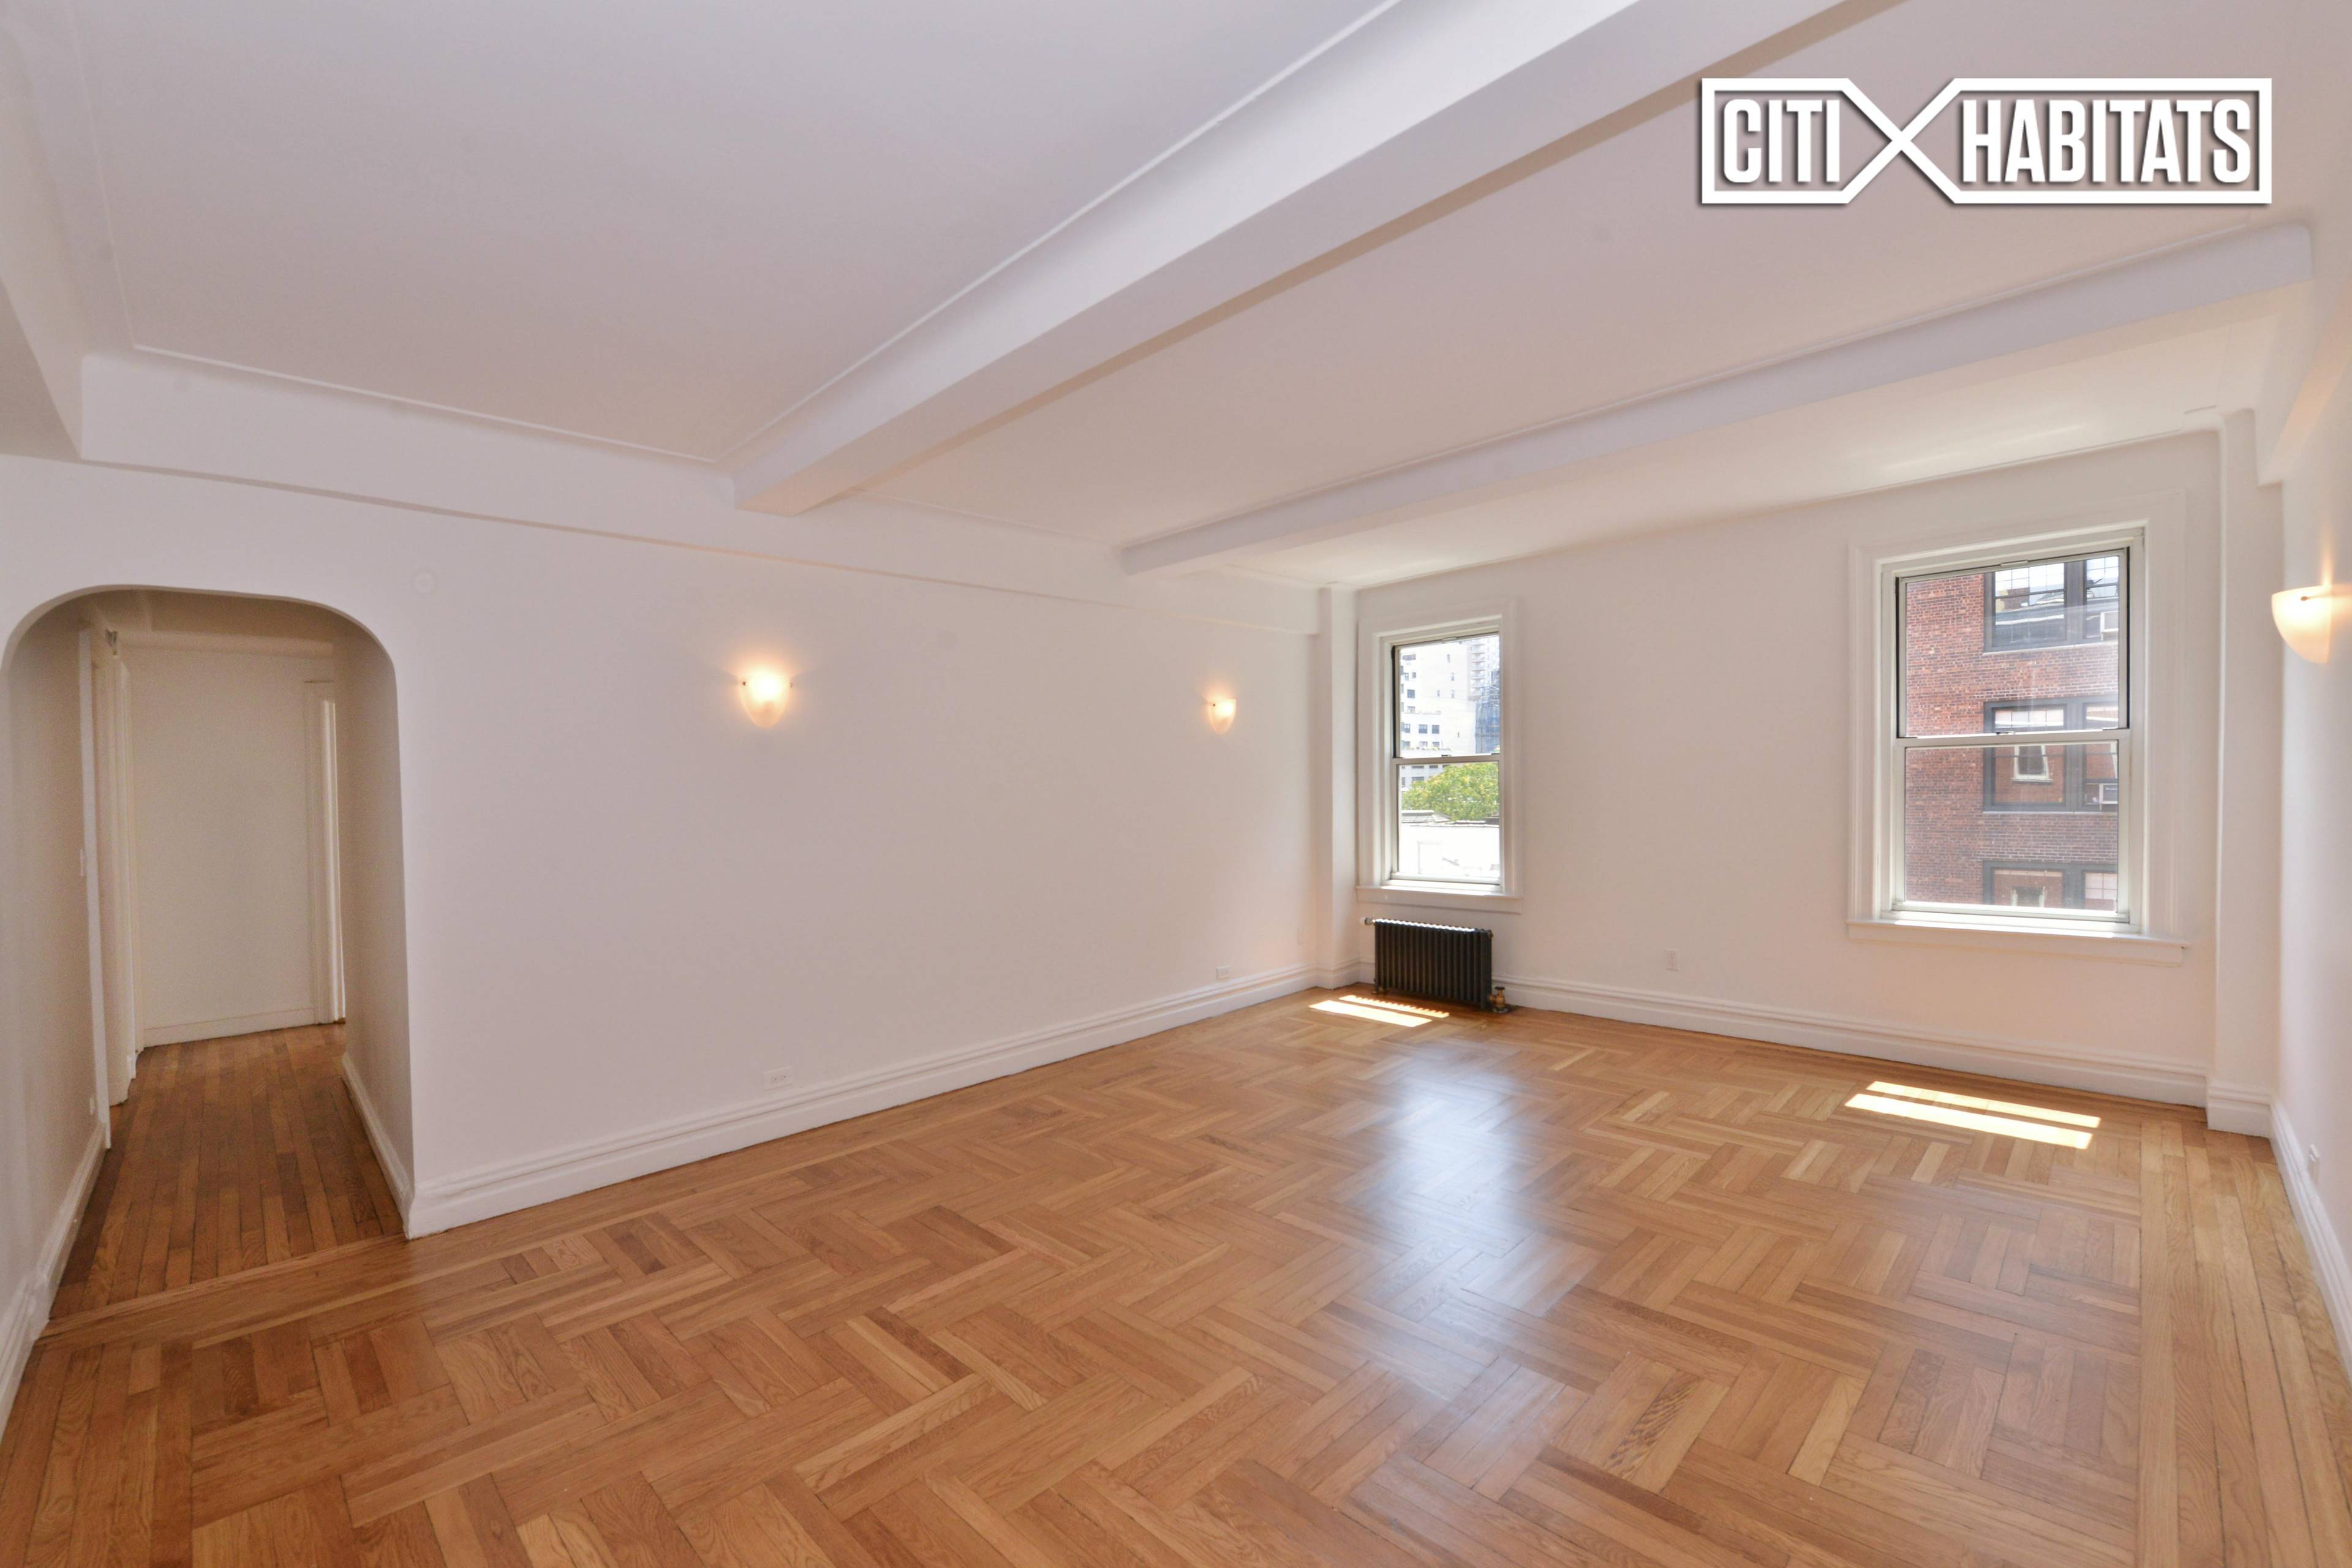 PRE WAR SPLENDORPerfectly located a few blocks from Central Park, shopping and transport, this bright, 1, 300 sq ft renovated apartment is available now.